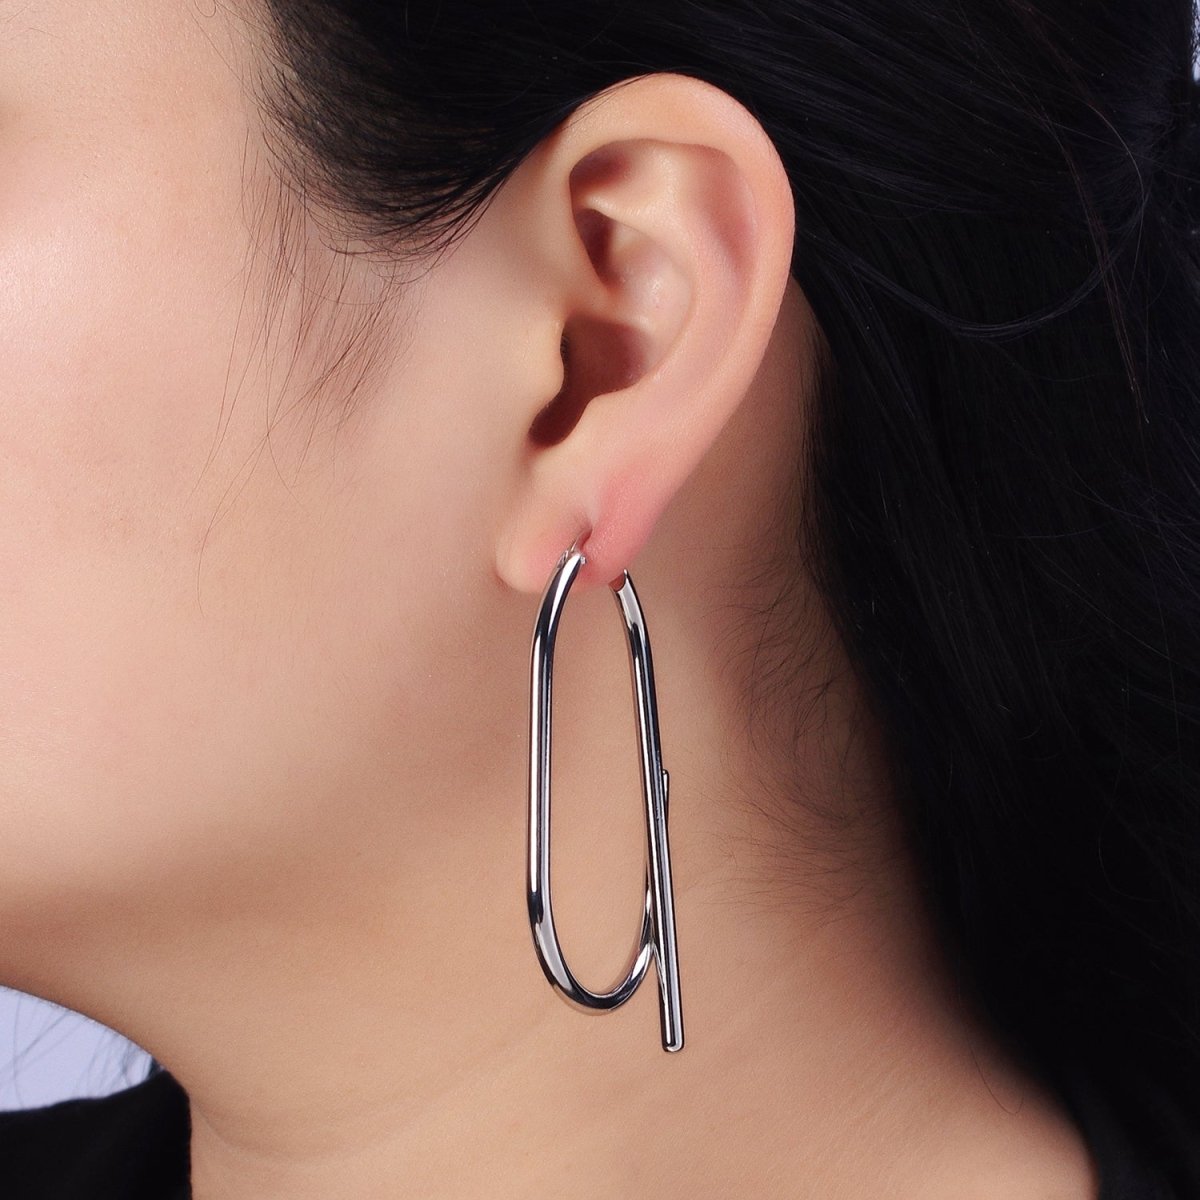 Gold Twisted Oval Hinged Hoop Earring with Hinged Closure Silver Big Oval Hoop Statement Jewelry AB733 AB942 - DLUXCA